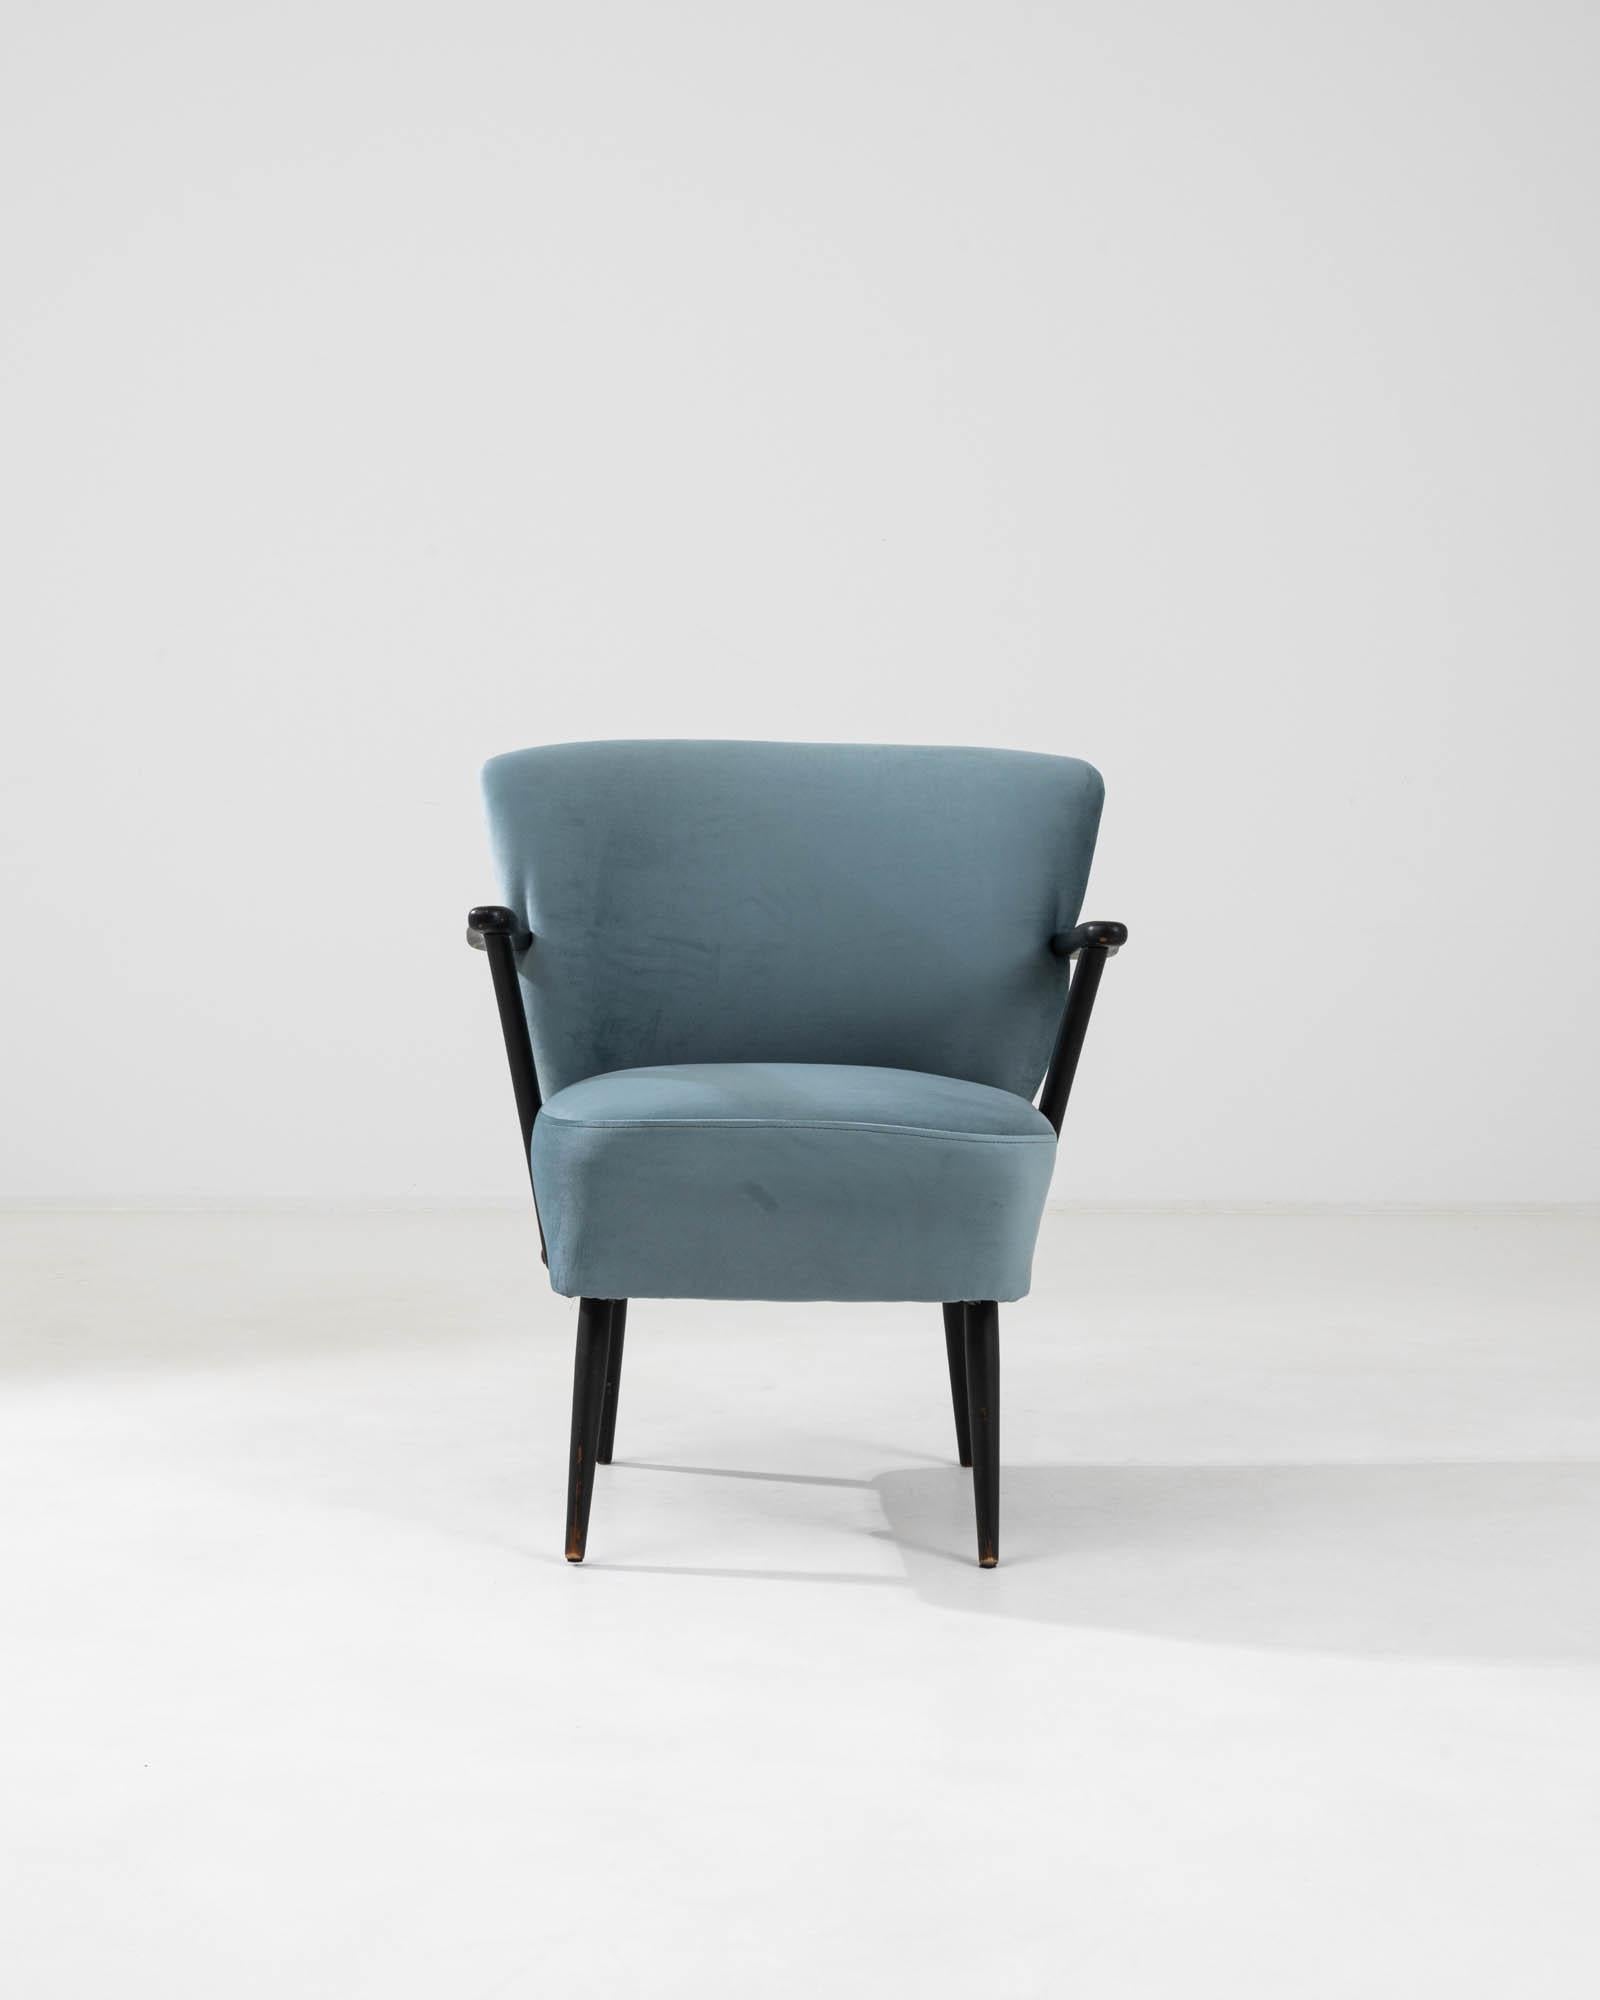 This 20th Century Danish upholstered armchair is a celebration of minimalist design and comfort. Enveloped in a plush, velvety teal fabric, it invites you to embrace its softness with every touch. The chair's sleek black armrests add a modern twist,